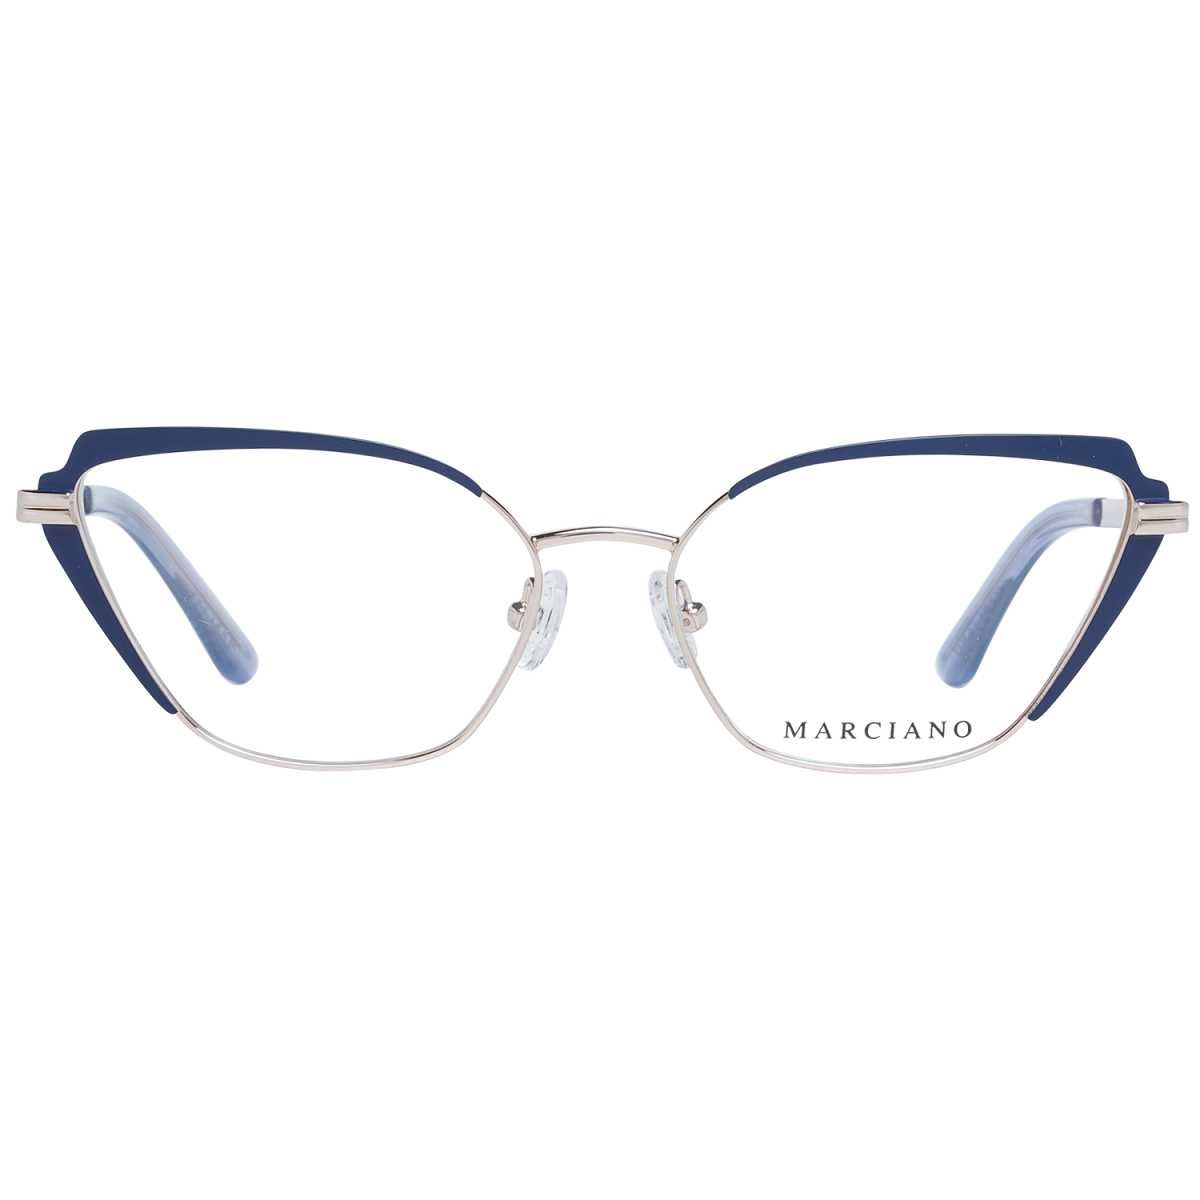 MARCIANO BY GUESS – Дамски рамки за очила CAT EYE "GOLD & BLUE" нови